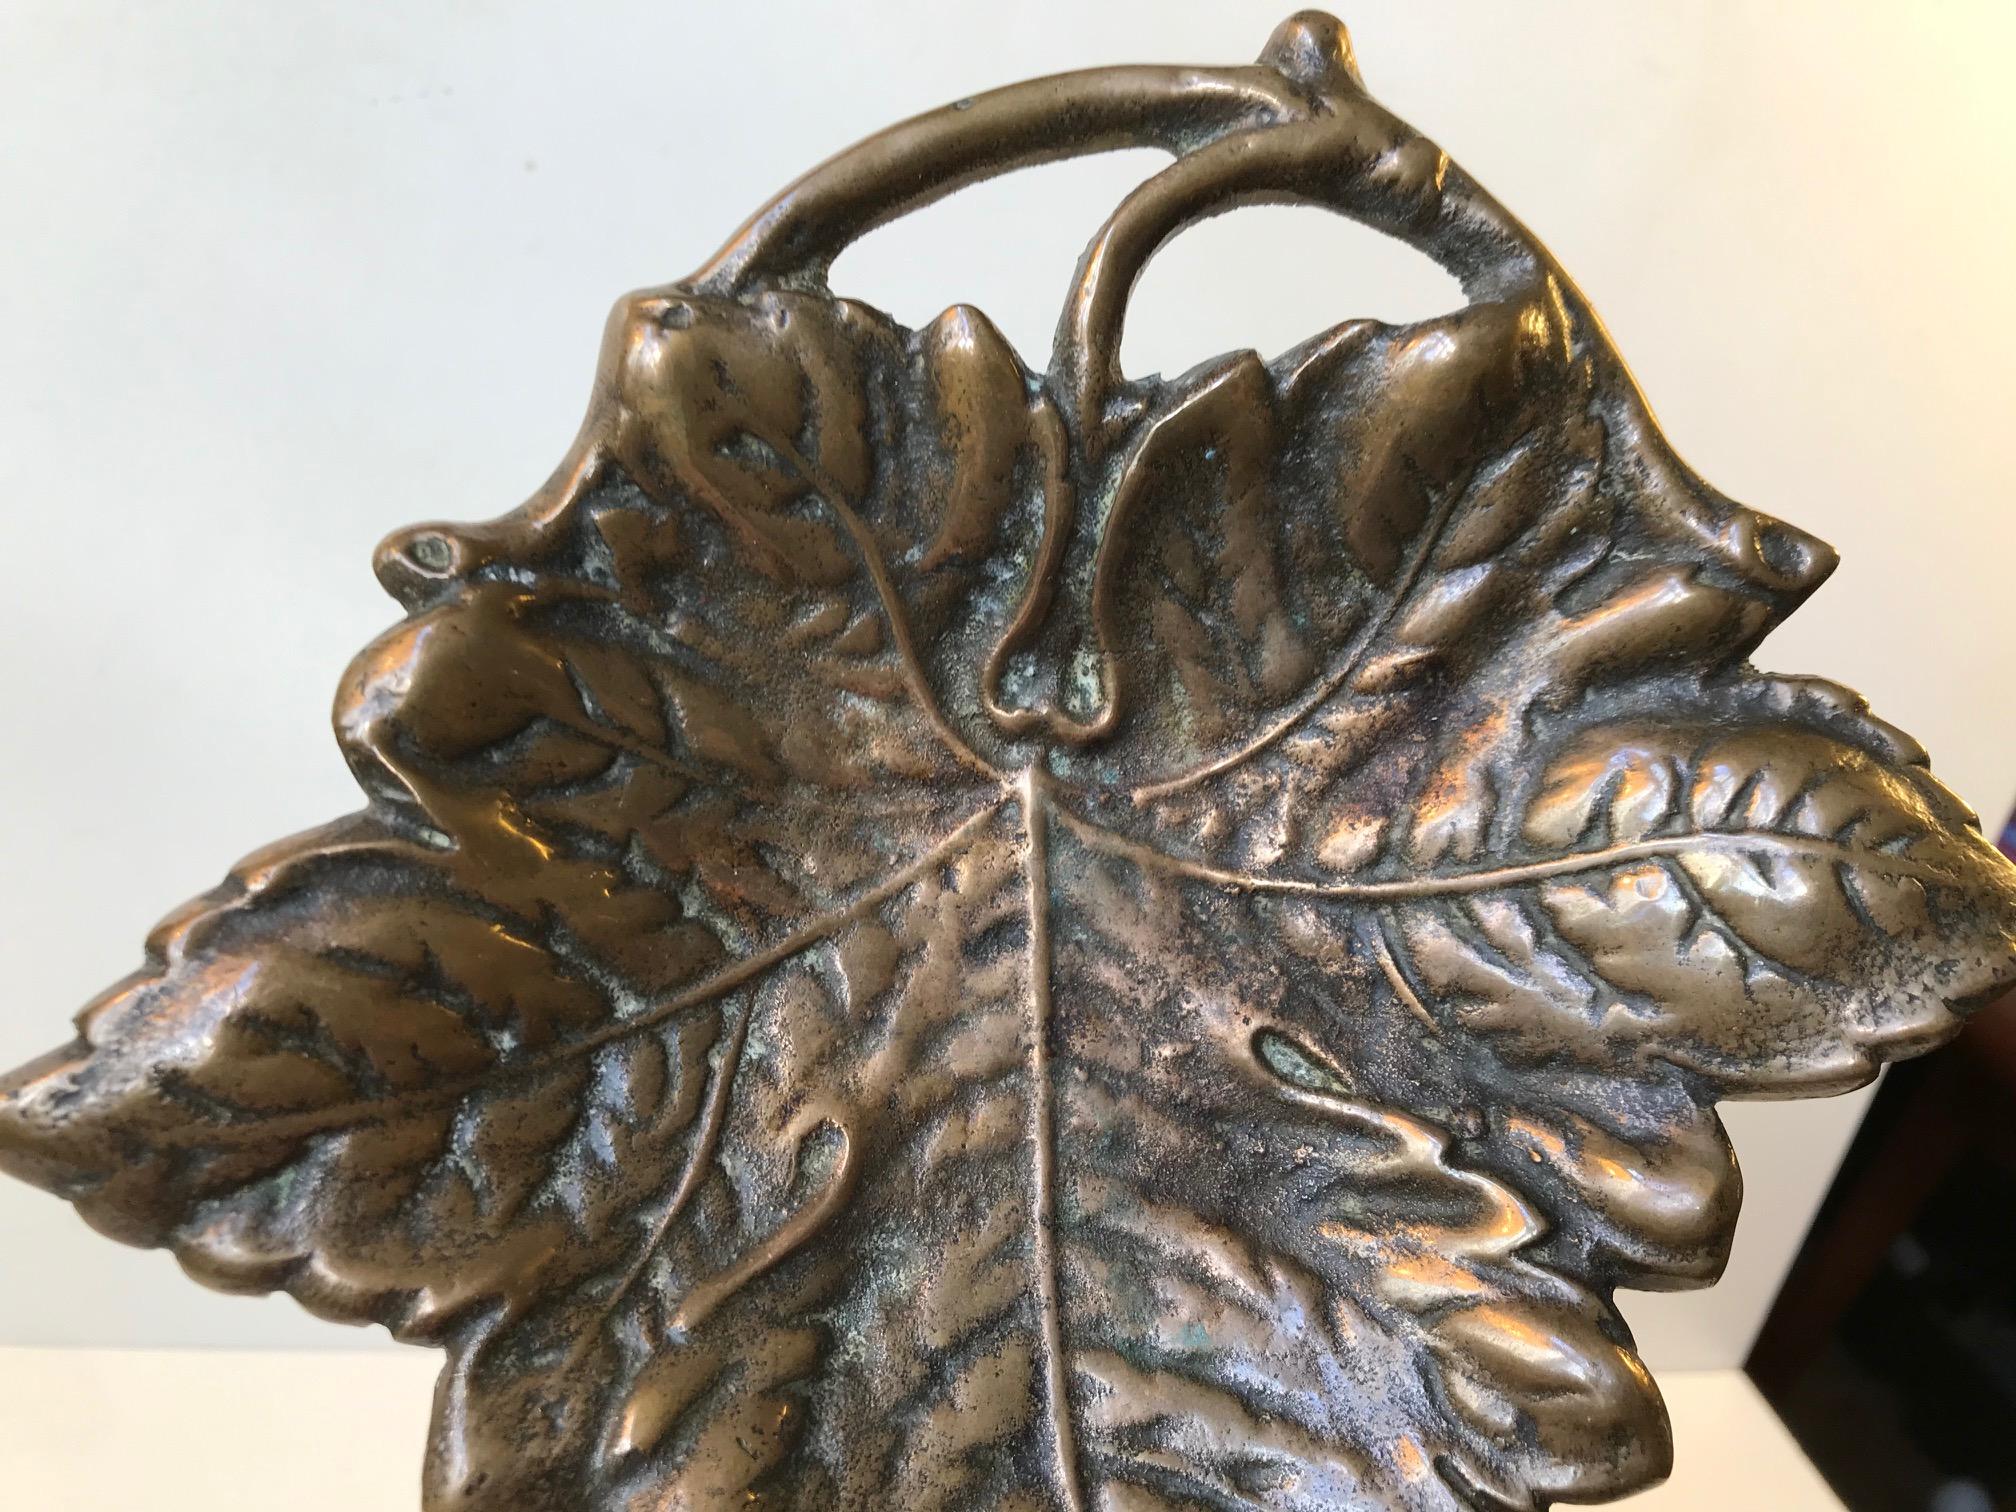 A naturalistically sculpted leaf shaped bowl in bronze. Probably made by Hammer Bronze in Denmark during the 1930s. Is has a great golden and rich patina.